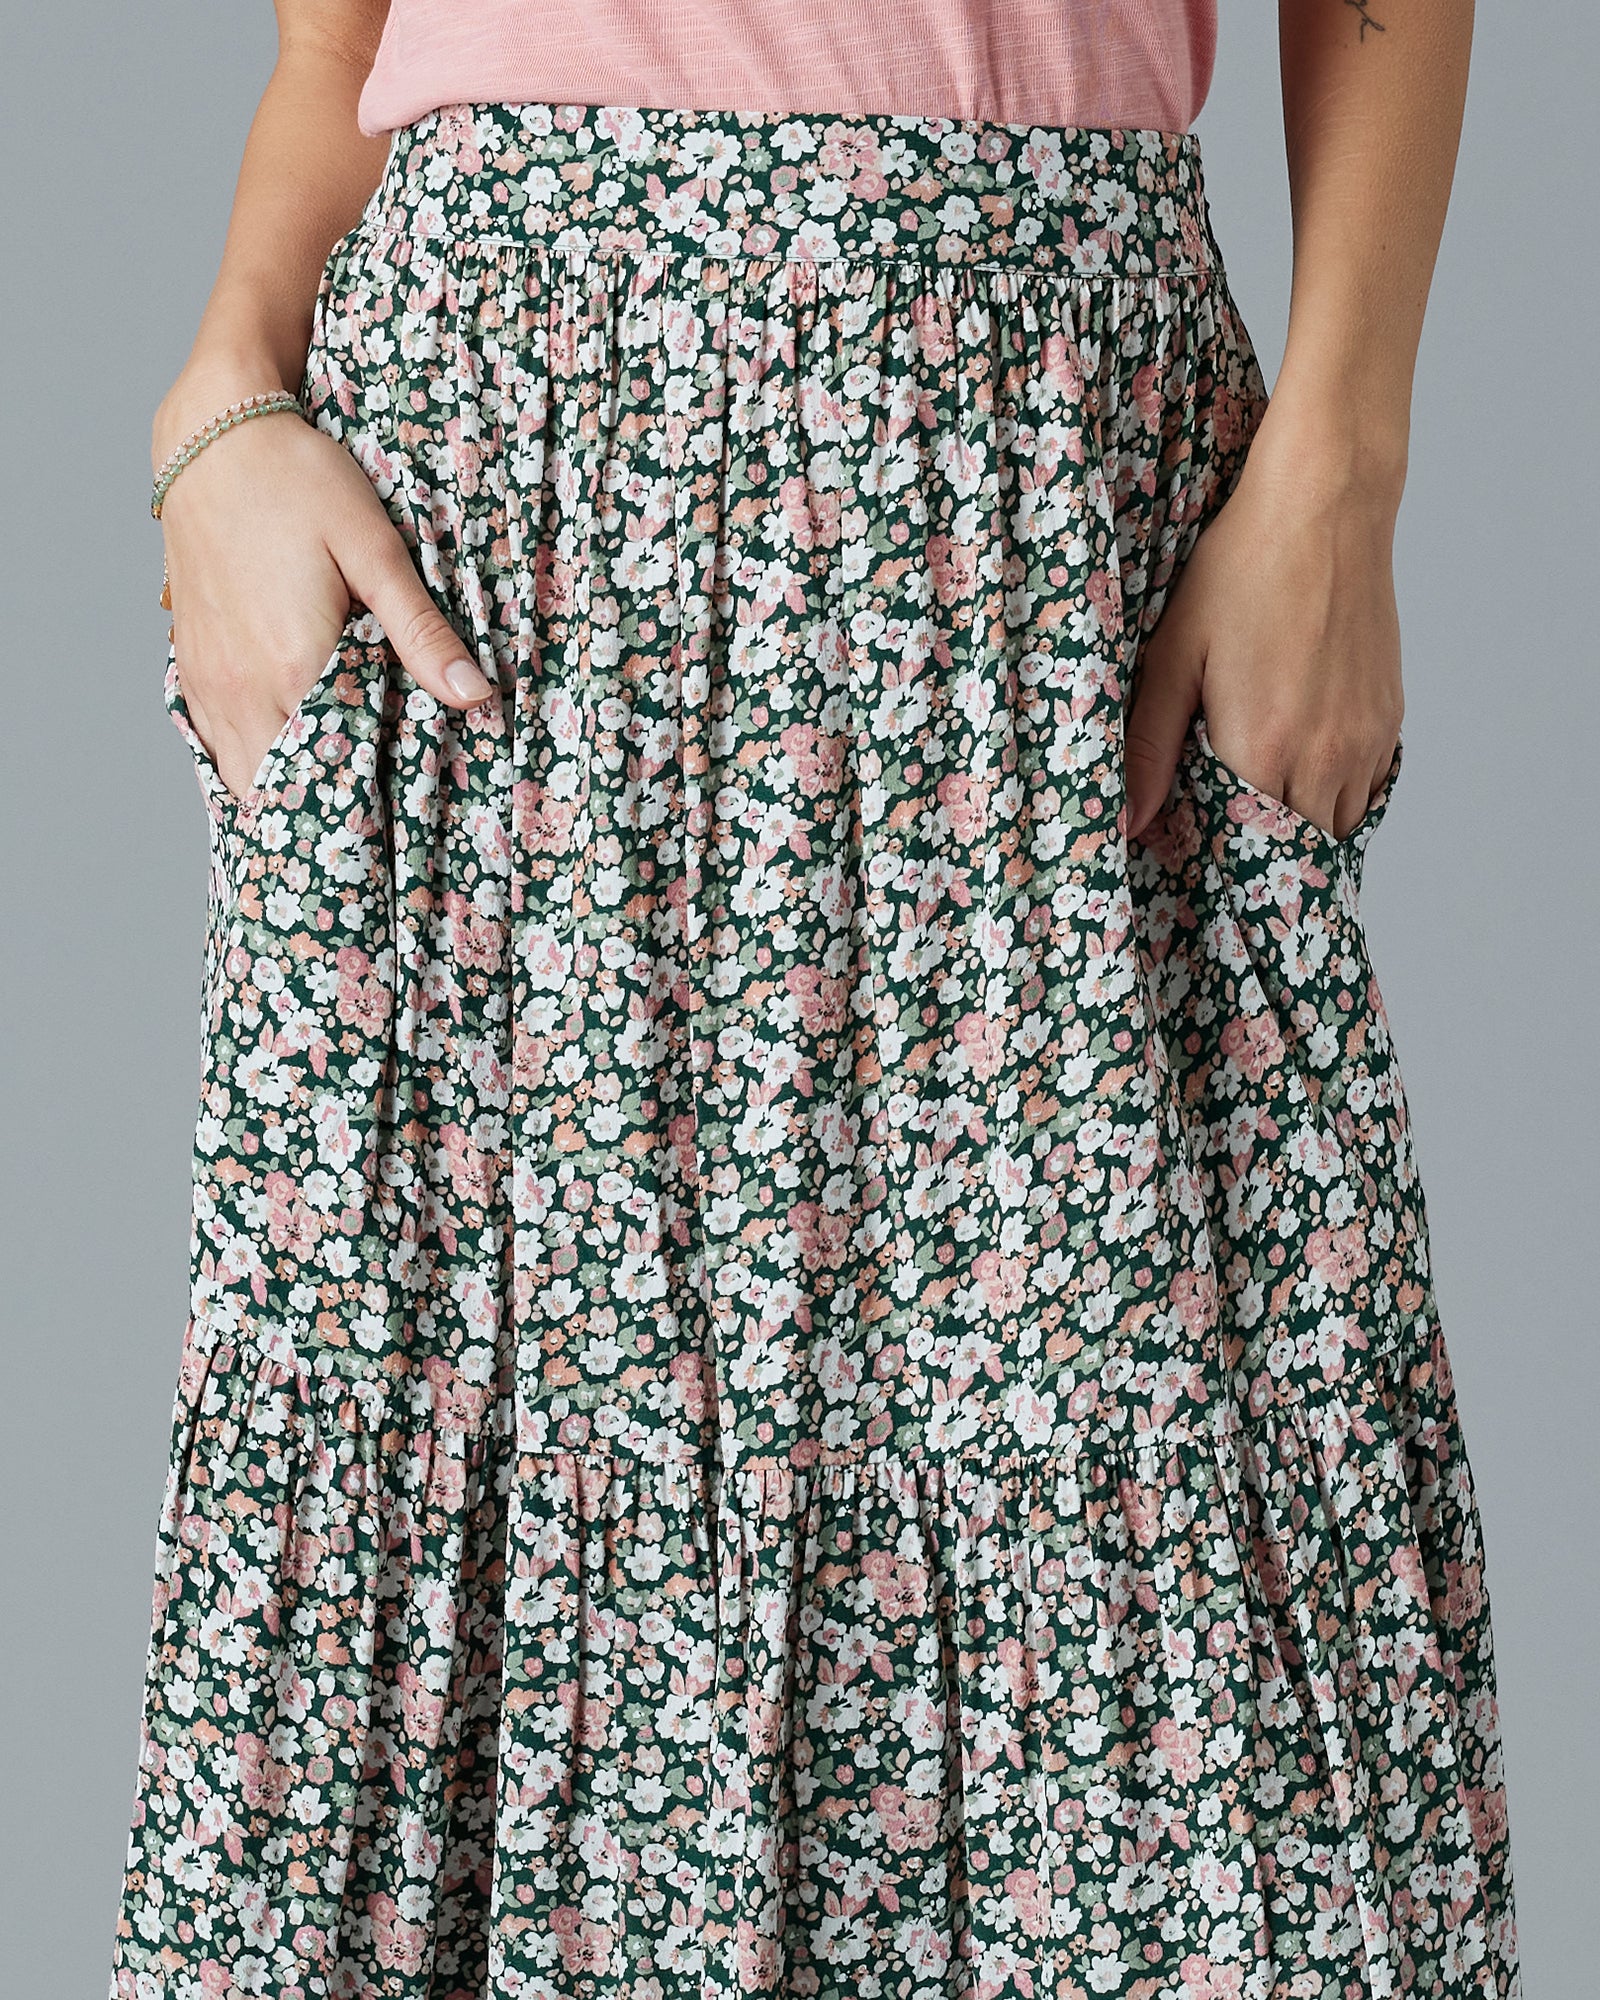 Woman in a floral, maxi-length skirt